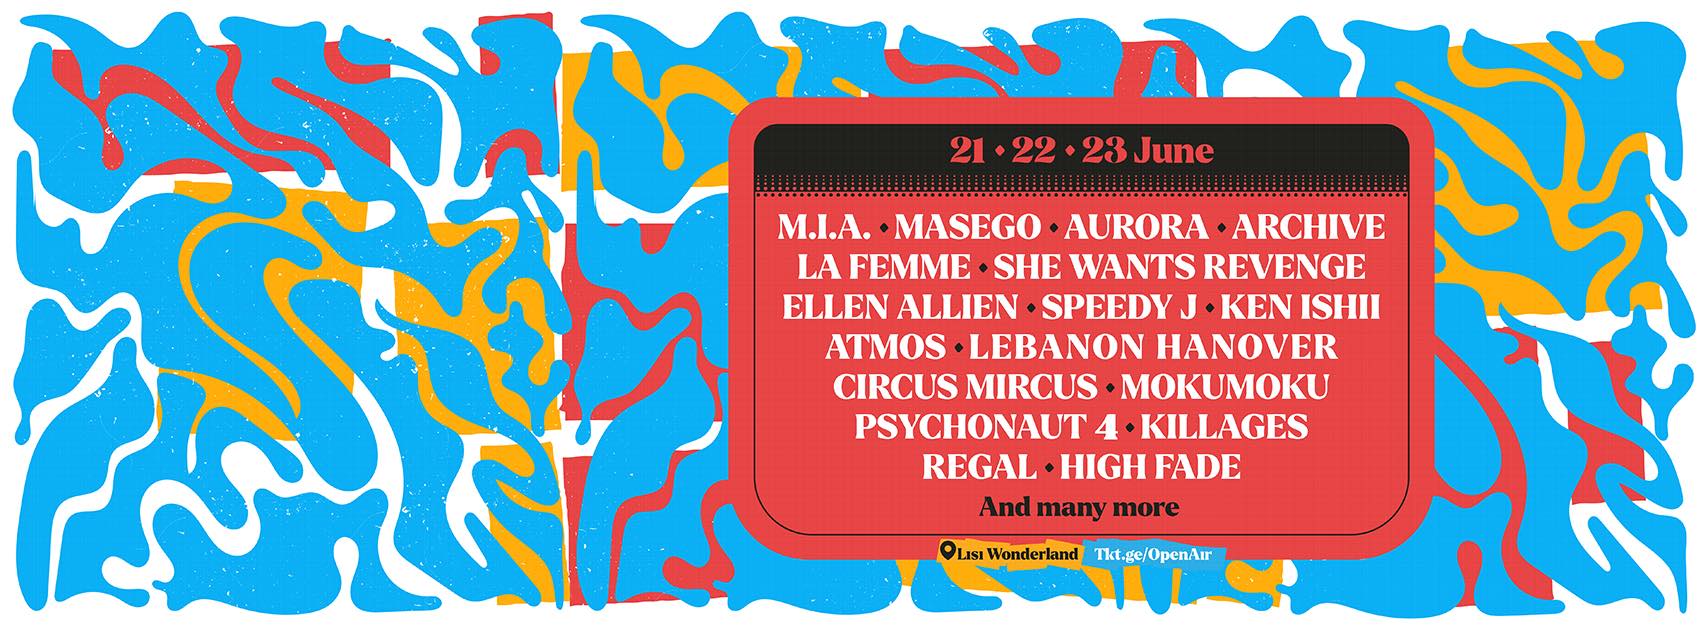 The Tbilisi Open Air festival celebrates 15 years of freedom, diversity, and music